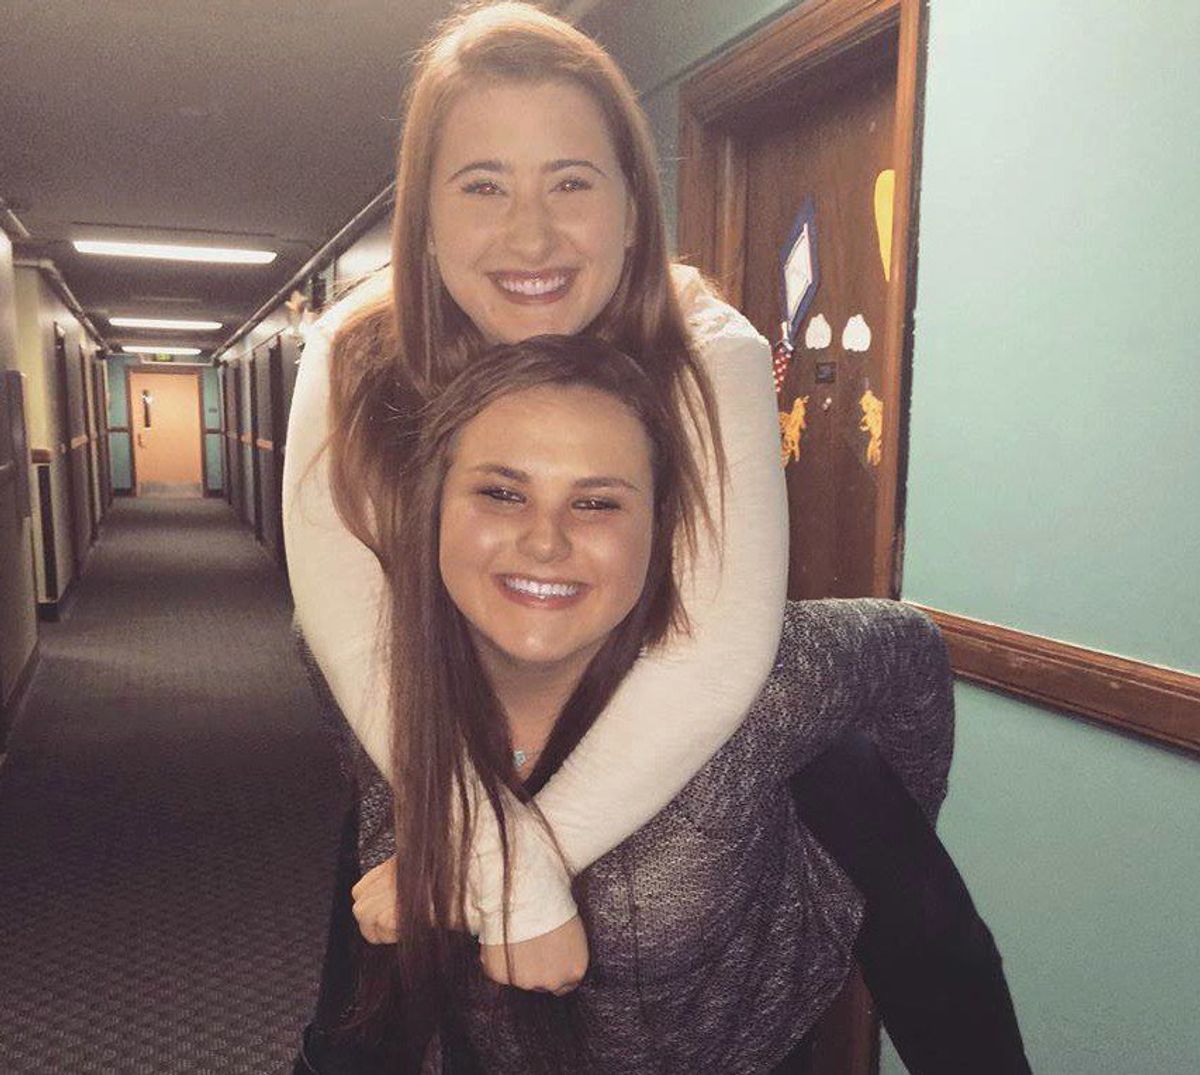 10 Reasons Your Roommate is Your Best Friend